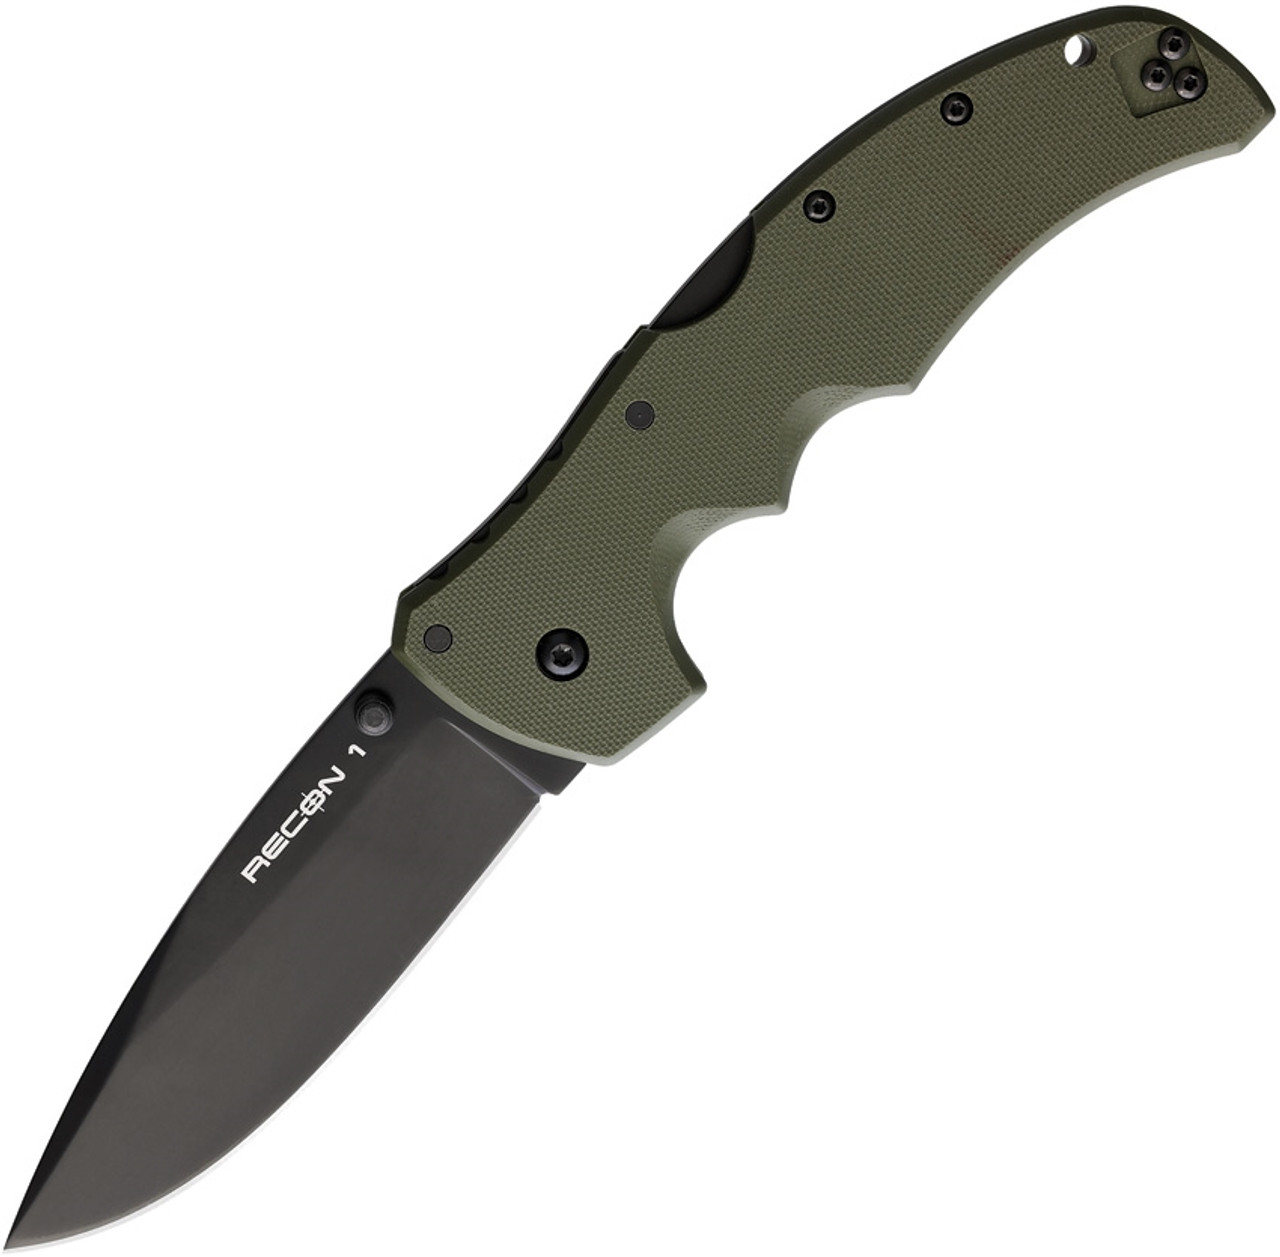 Cold Steel Recon 1 (CS27BSODBK) - 4.00" S35VN Black DLC Coated Spear Point Blade, Olive Drab Handle w/ Tri-Ad Lock